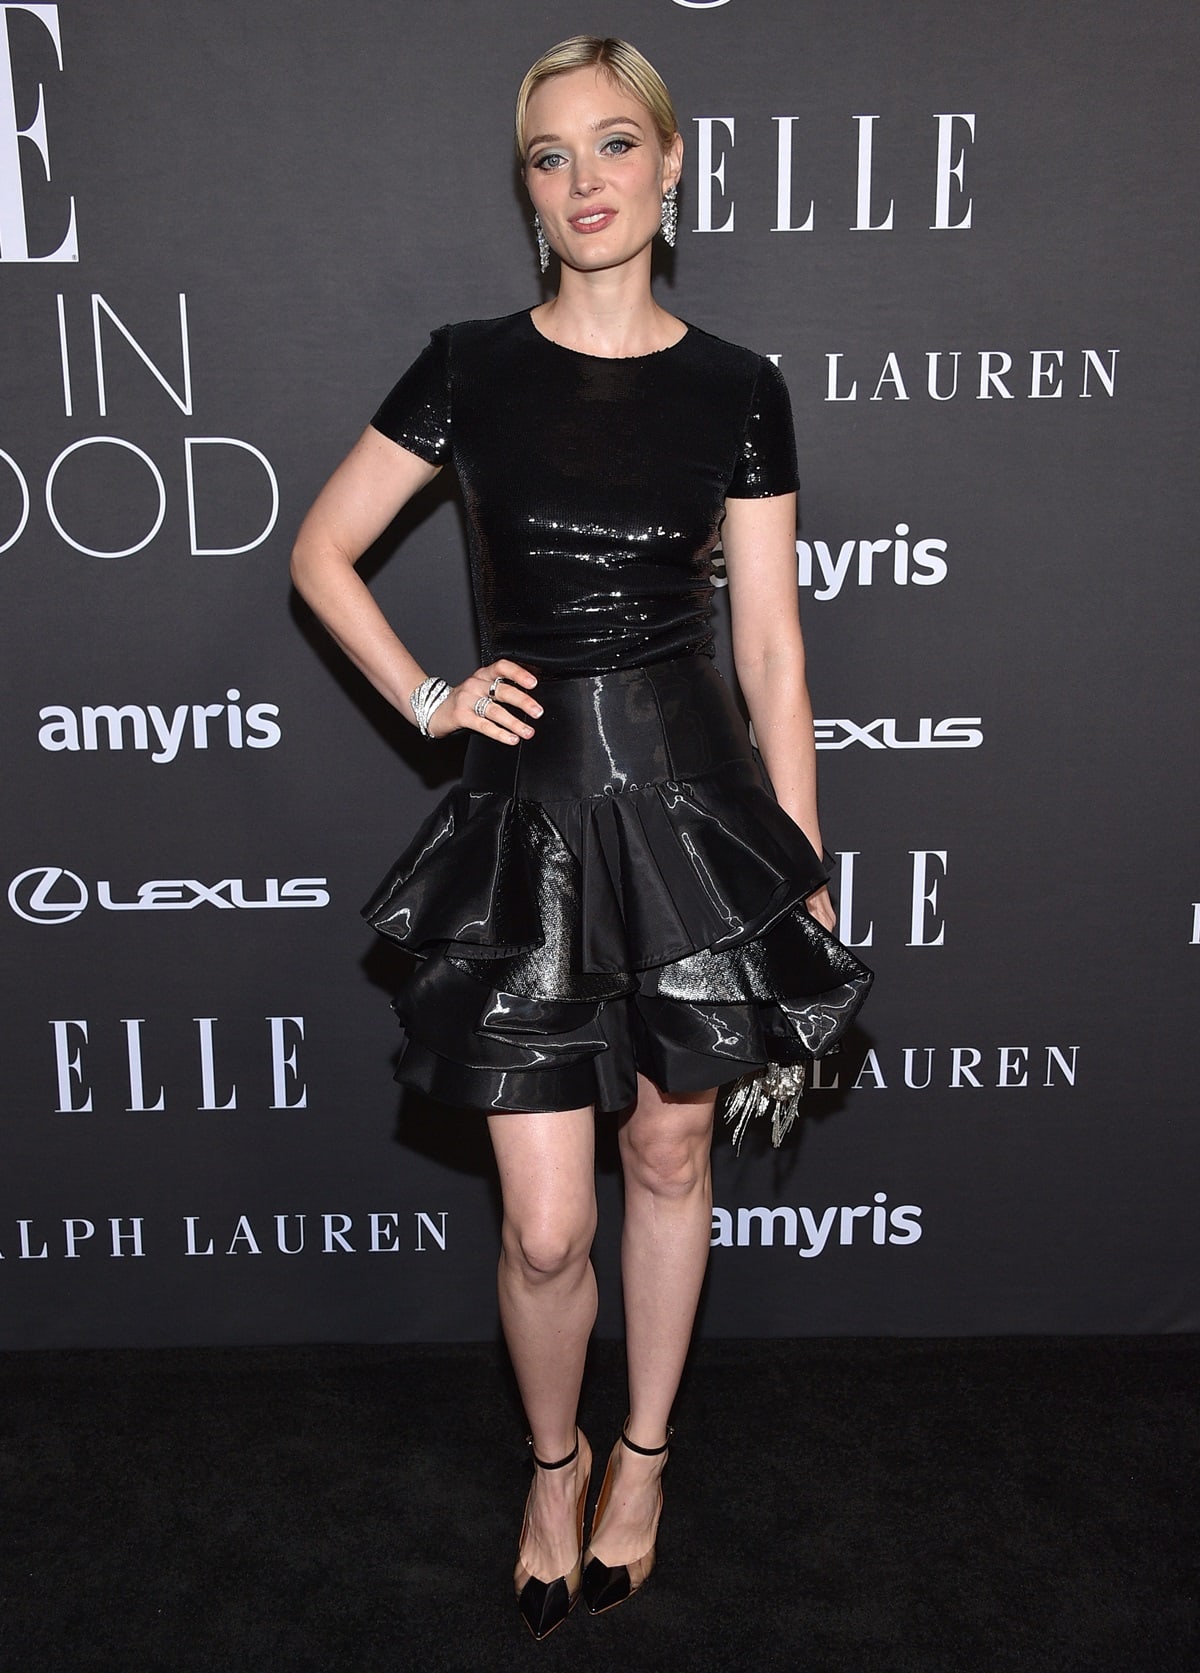 Bella Heathcote showcased an elegant Ralph Lauren Collection all-black ensemble, complemented by Malone Souliers Malia pumps and accessorized with a silver clutch and exquisite silver Cartier jewelry pieces at the 29th Annual ELLE Women in Hollywood Celebration